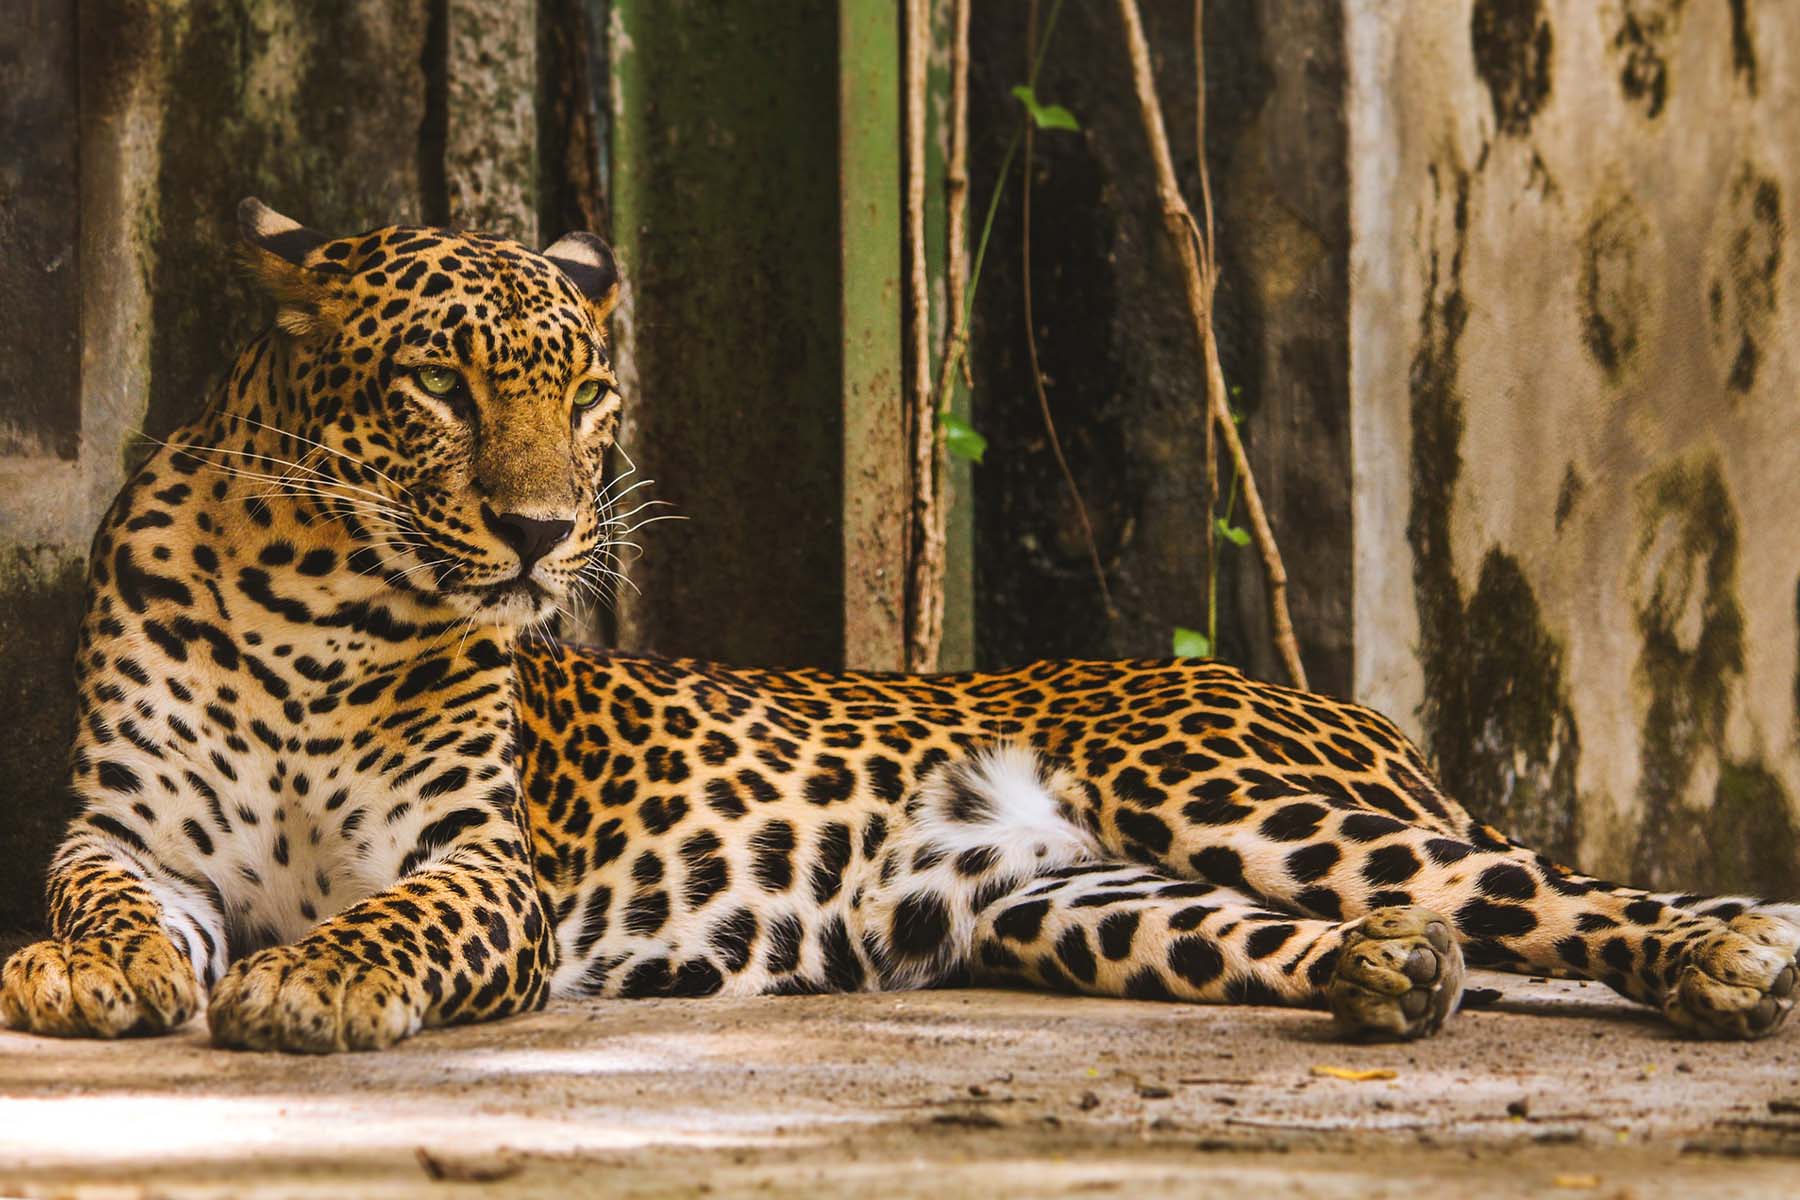 Leopard lying down and relaxing